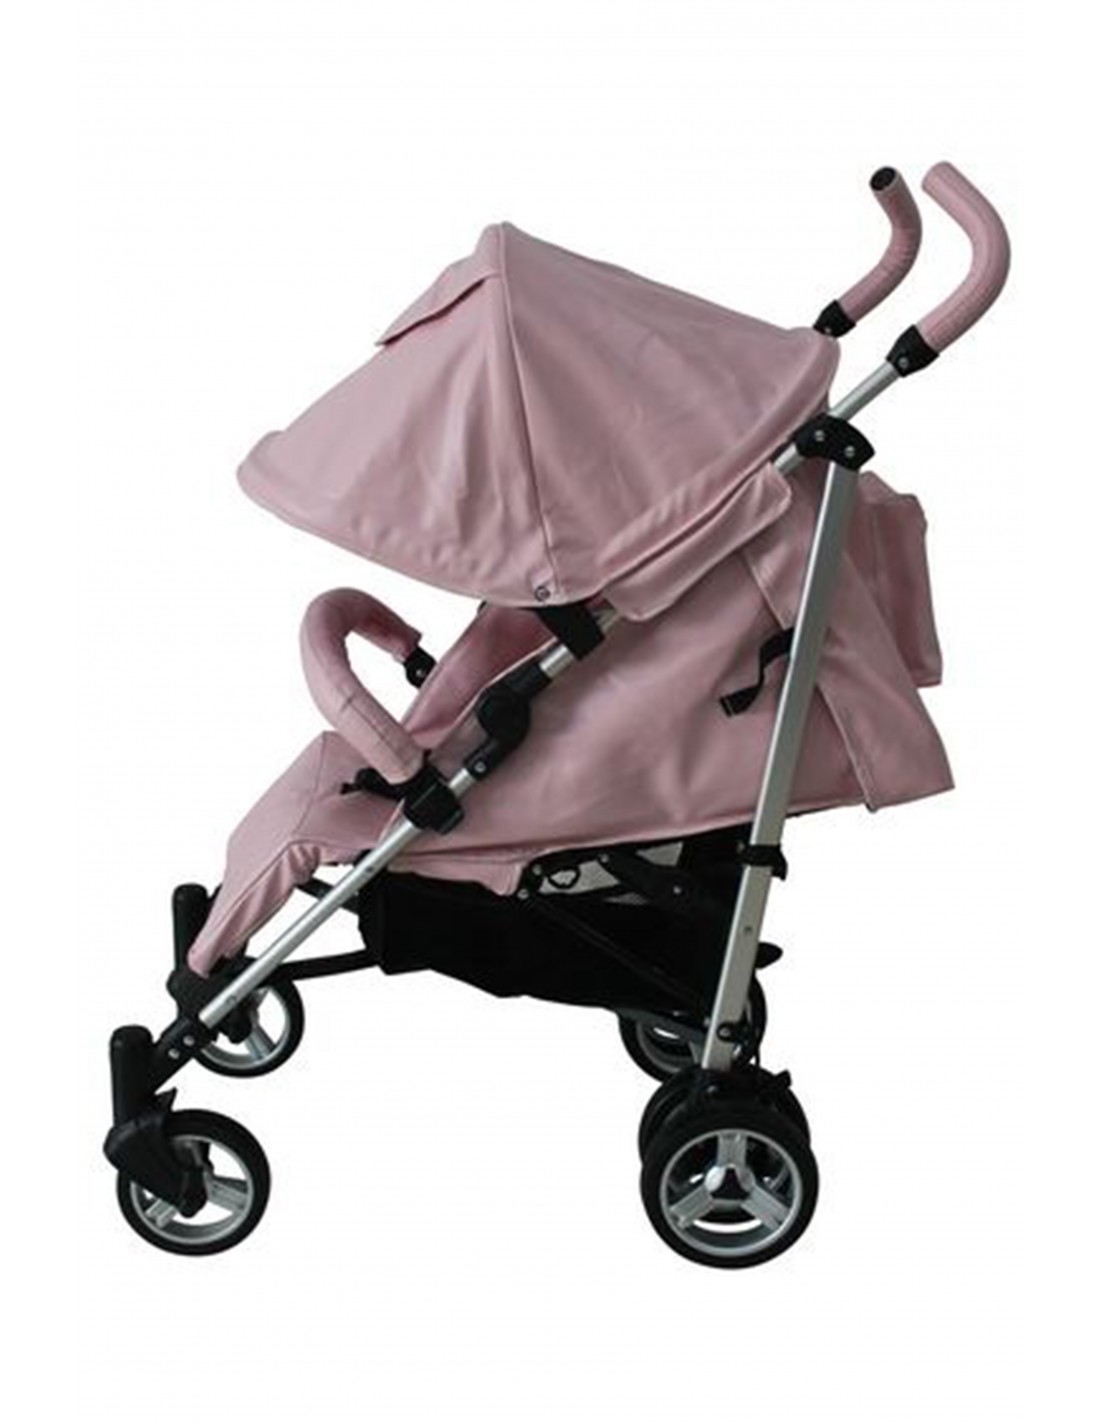 Massimo Leatherette Stroller Pram complete with Changing Bag & Footmuff